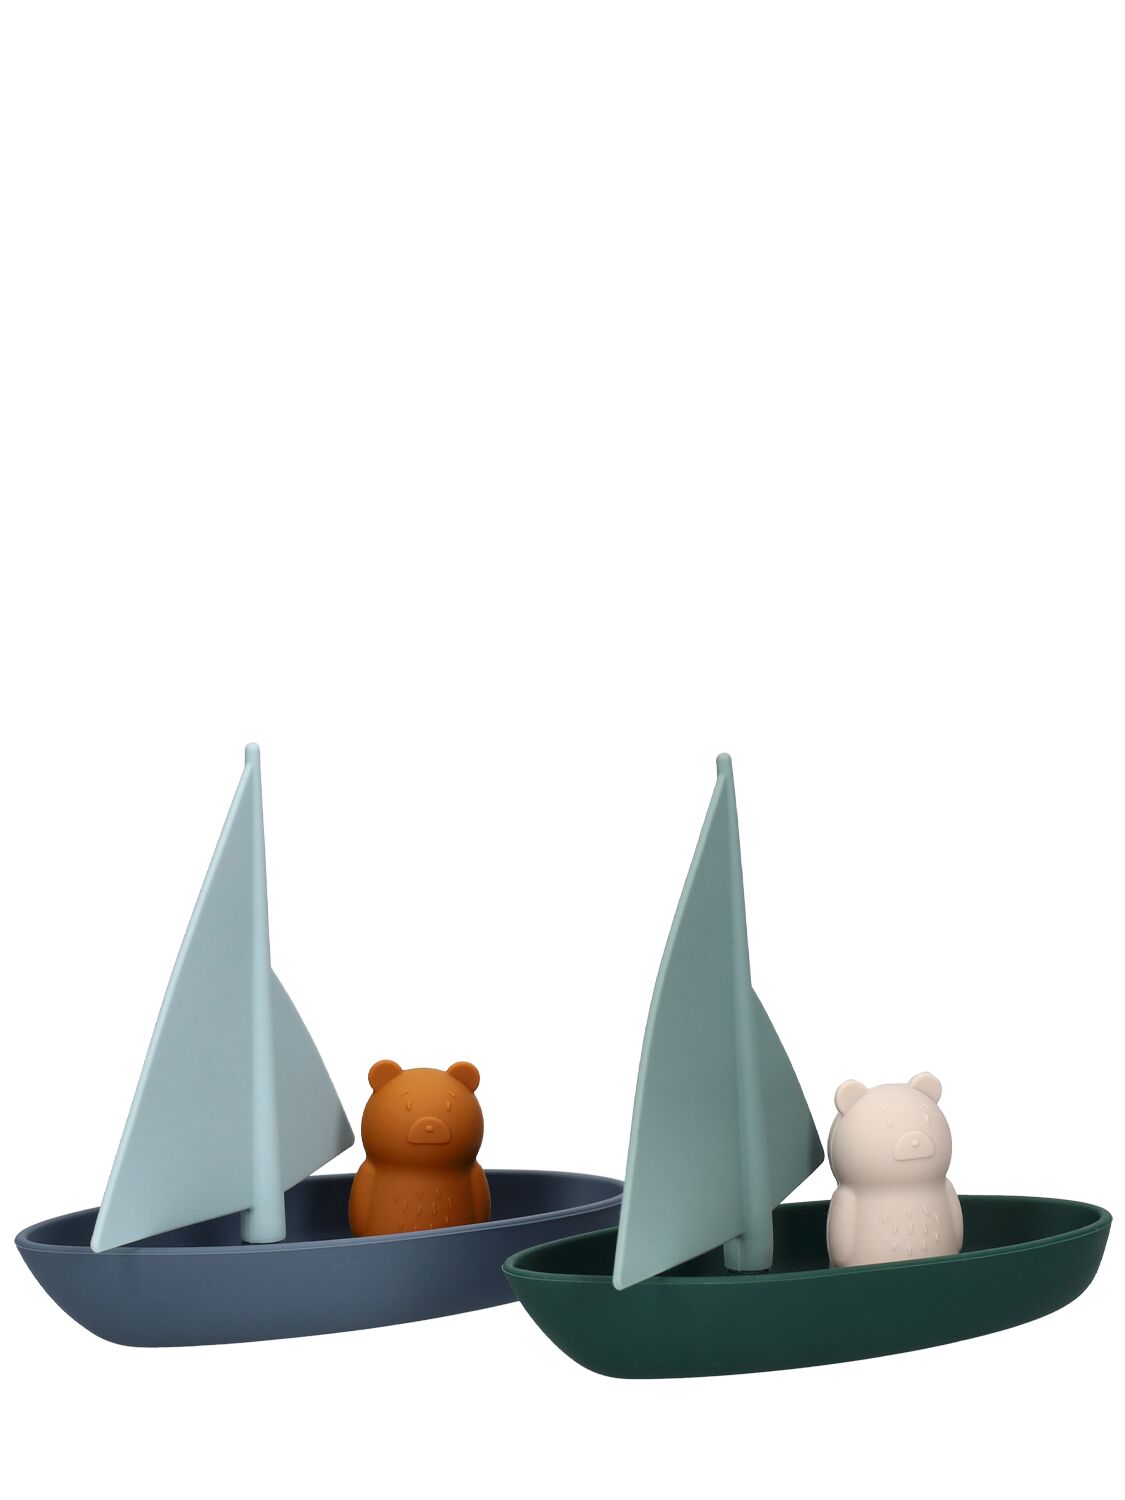 Image of Silicon Boat Set